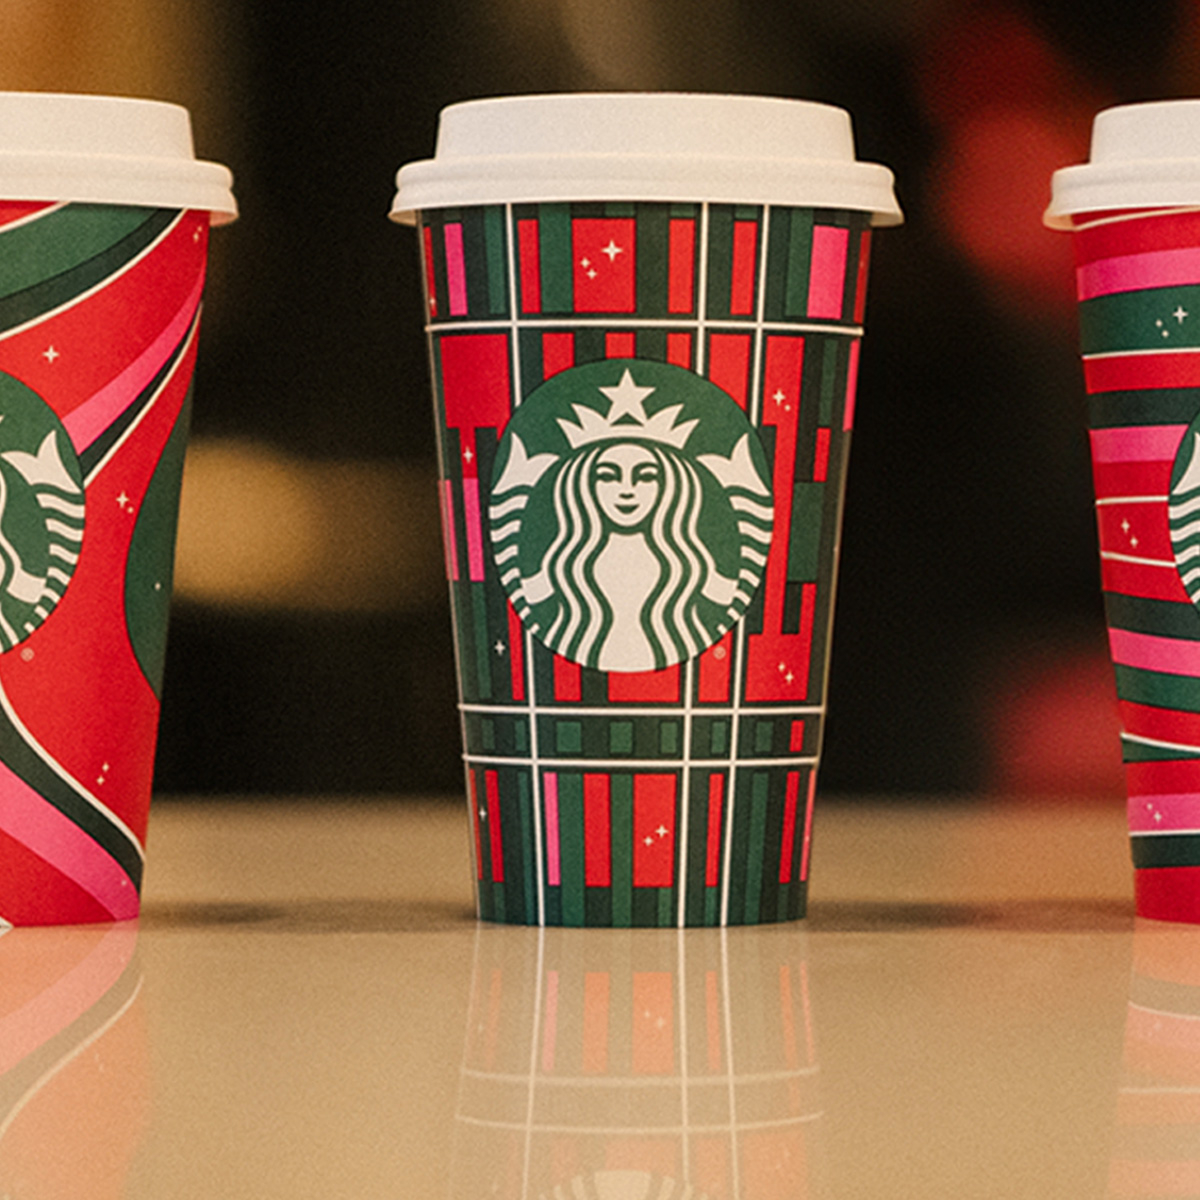 https://akns-images.eonline.com/eol_images/Entire_Site/2023101/rs_1200x1200-231101091835-1200.starbucks-holiday-cups-2023-tb-110123.jpg?fit=around%7C660:372&output-quality=90&crop=660:372;center,top